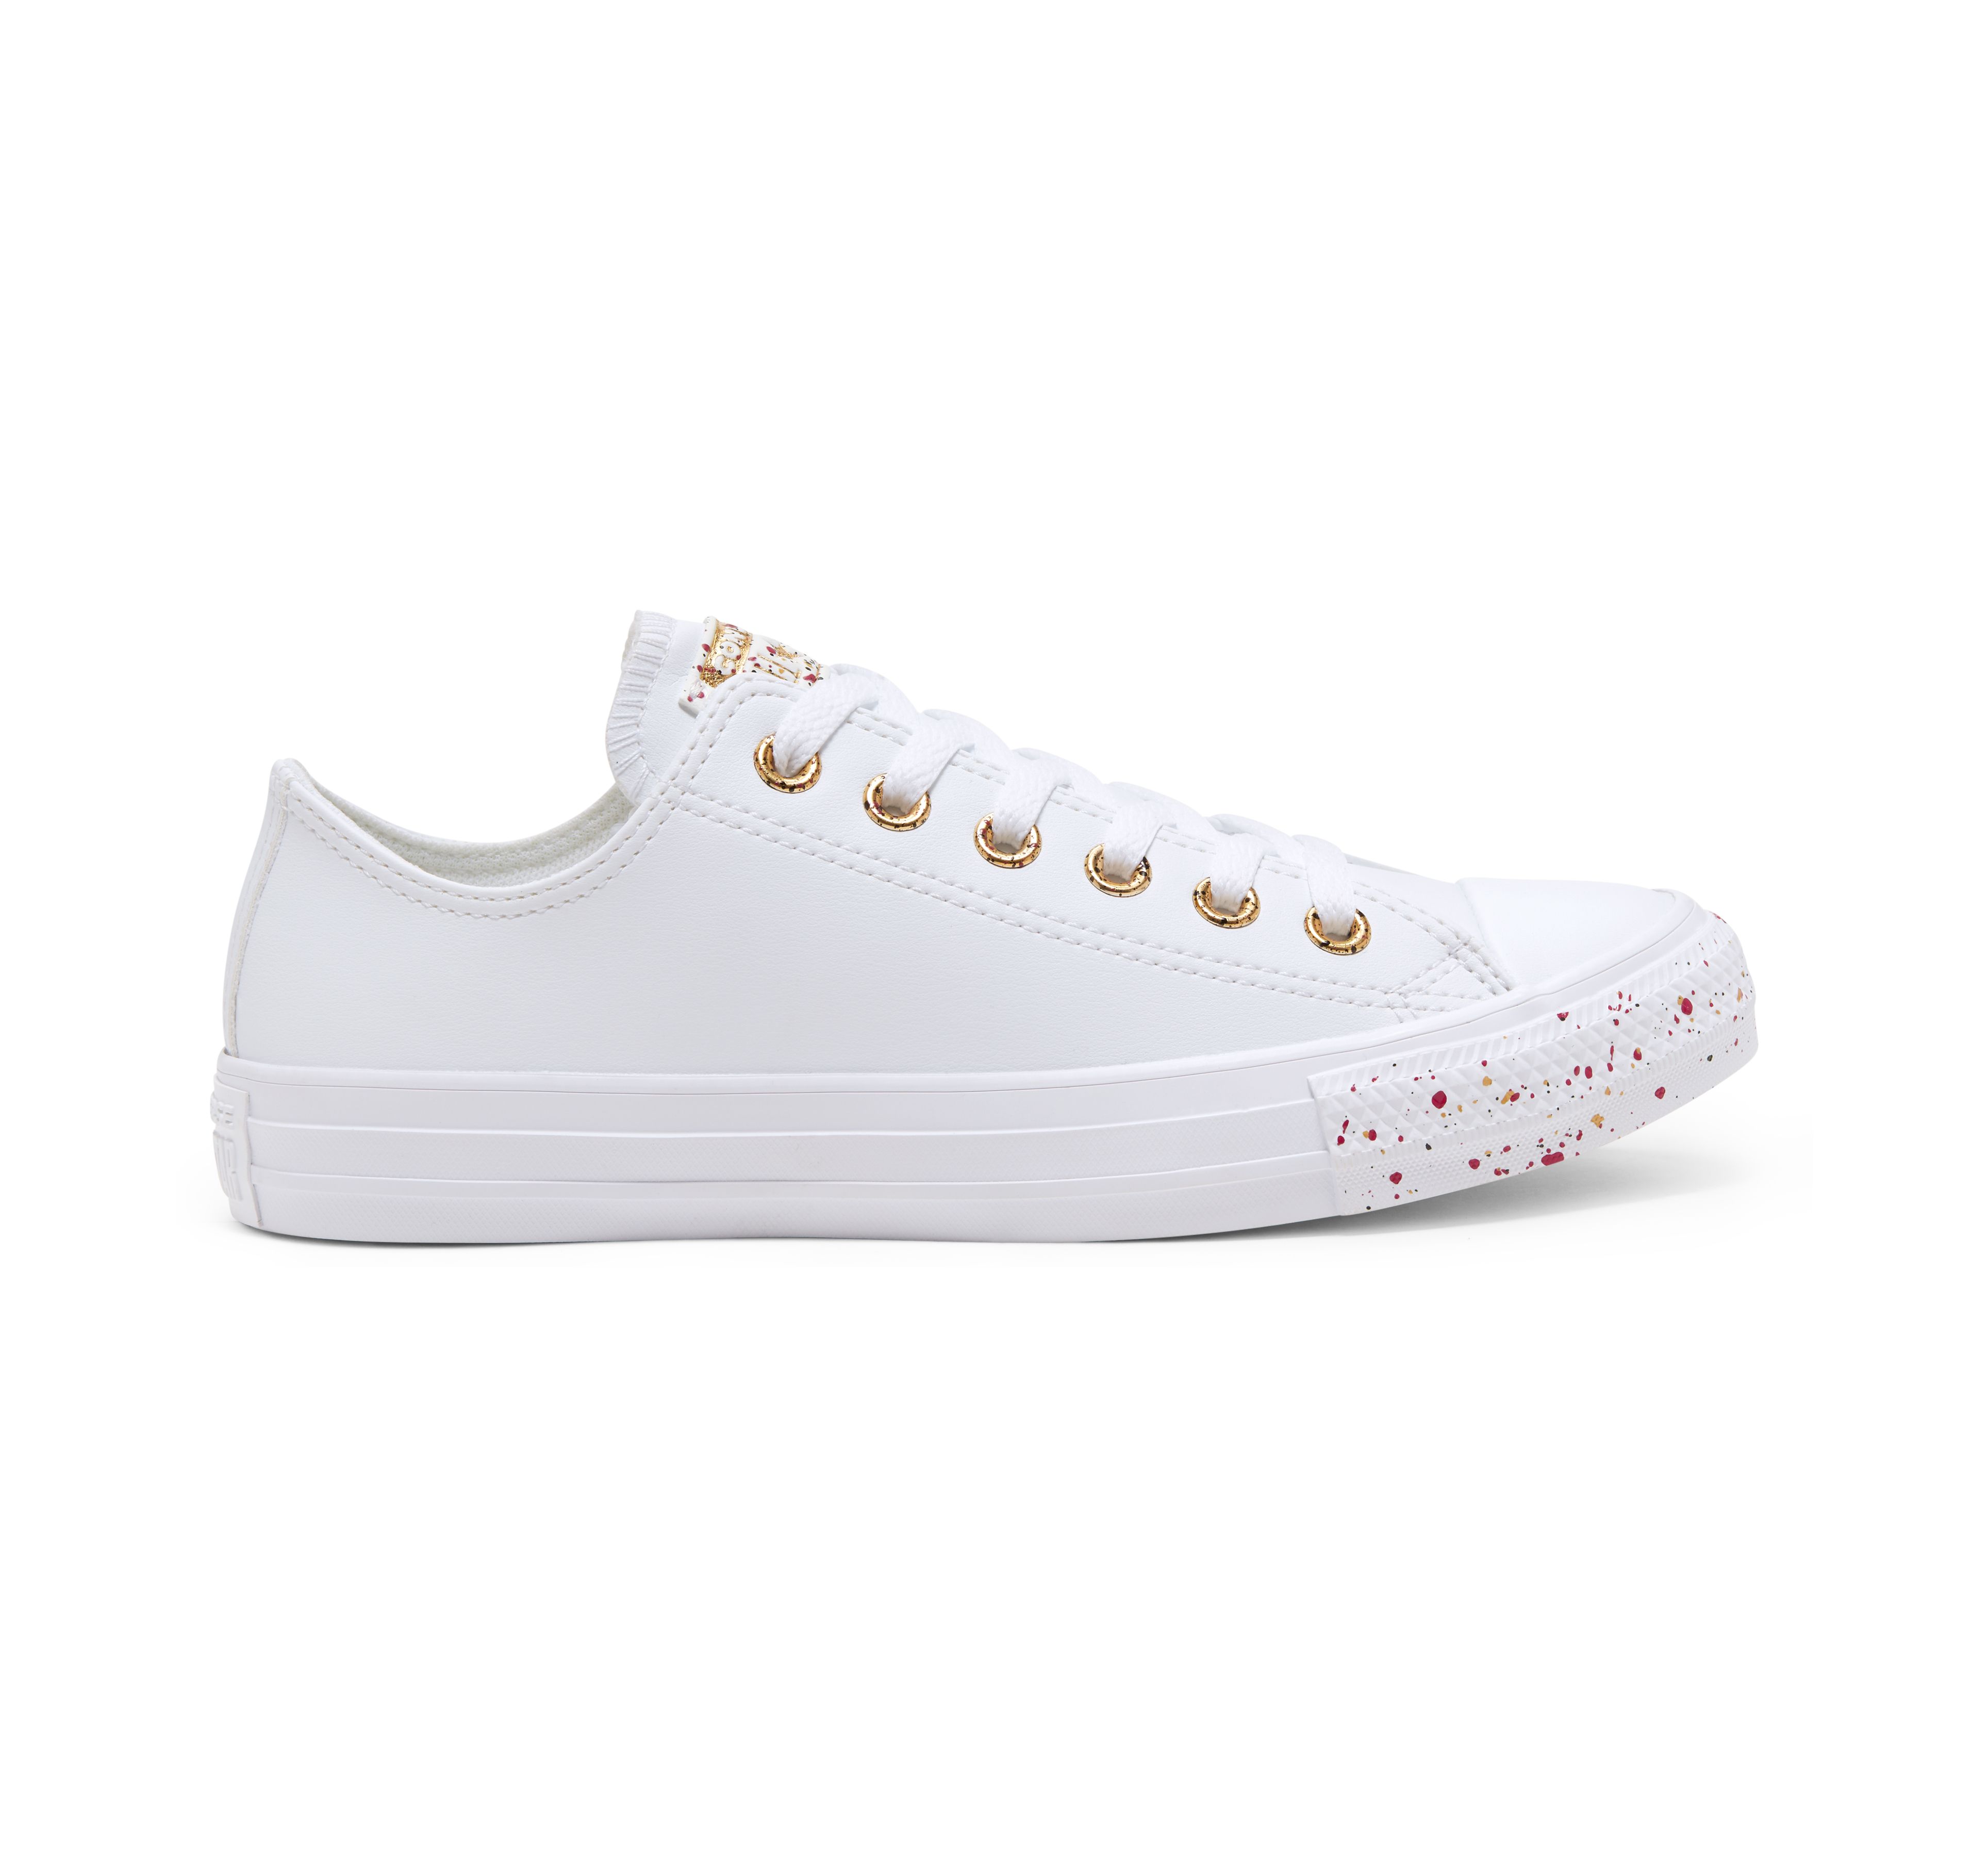 where to buy converse tennis shoes